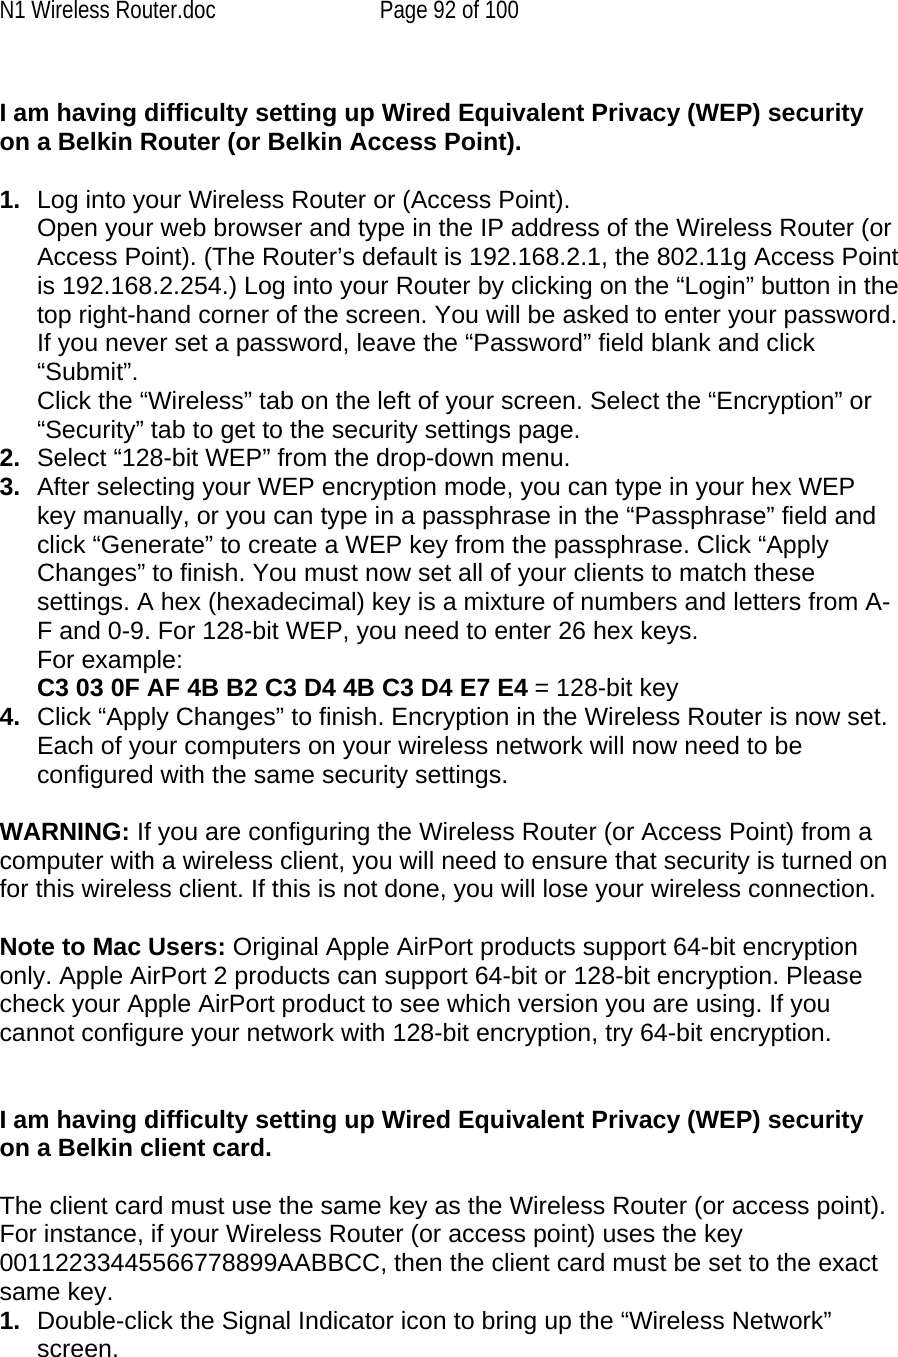 N1 Wireless Router.doc  Page 92 of 100  I am having difficulty setting up Wired Equivalent Privacy (WEP) security on a Belkin Router (or Belkin Access Point).  1.  Log into your Wireless Router or (Access Point).  Open your web browser and type in the IP address of the Wireless Router (or Access Point). (The Router’s default is 192.168.2.1, the 802.11g Access Point is 192.168.2.254.) Log into your Router by clicking on the “Login” button in the top right-hand corner of the screen. You will be asked to enter your password. If you never set a password, leave the “Password” field blank and click “Submit”.  Click the “Wireless” tab on the left of your screen. Select the “Encryption” or “Security” tab to get to the security settings page. 2.  Select “128-bit WEP” from the drop-down menu. 3.  After selecting your WEP encryption mode, you can type in your hex WEP key manually, or you can type in a passphrase in the “Passphrase” field and click “Generate” to create a WEP key from the passphrase. Click “Apply Changes” to finish. You must now set all of your clients to match these settings. A hex (hexadecimal) key is a mixture of numbers and letters from A-F and 0-9. For 128-bit WEP, you need to enter 26 hex keys.  For example:  C3 03 0F AF 4B B2 C3 D4 4B C3 D4 E7 E4 = 128-bit key 4.  Click “Apply Changes” to finish. Encryption in the Wireless Router is now set. Each of your computers on your wireless network will now need to be configured with the same security settings.   WARNING: If you are configuring the Wireless Router (or Access Point) from a computer with a wireless client, you will need to ensure that security is turned on for this wireless client. If this is not done, you will lose your wireless connection.  Note to Mac Users: Original Apple AirPort products support 64-bit encryption only. Apple AirPort 2 products can support 64-bit or 128-bit encryption. Please check your Apple AirPort product to see which version you are using. If you cannot configure your network with 128-bit encryption, try 64-bit encryption.    I am having difficulty setting up Wired Equivalent Privacy (WEP) security on a Belkin client card.  The client card must use the same key as the Wireless Router (or access point). For instance, if your Wireless Router (or access point) uses the key 00112233445566778899AABBCC, then the client card must be set to the exact same key. 1.  Double-click the Signal Indicator icon to bring up the “Wireless Network” screen.  